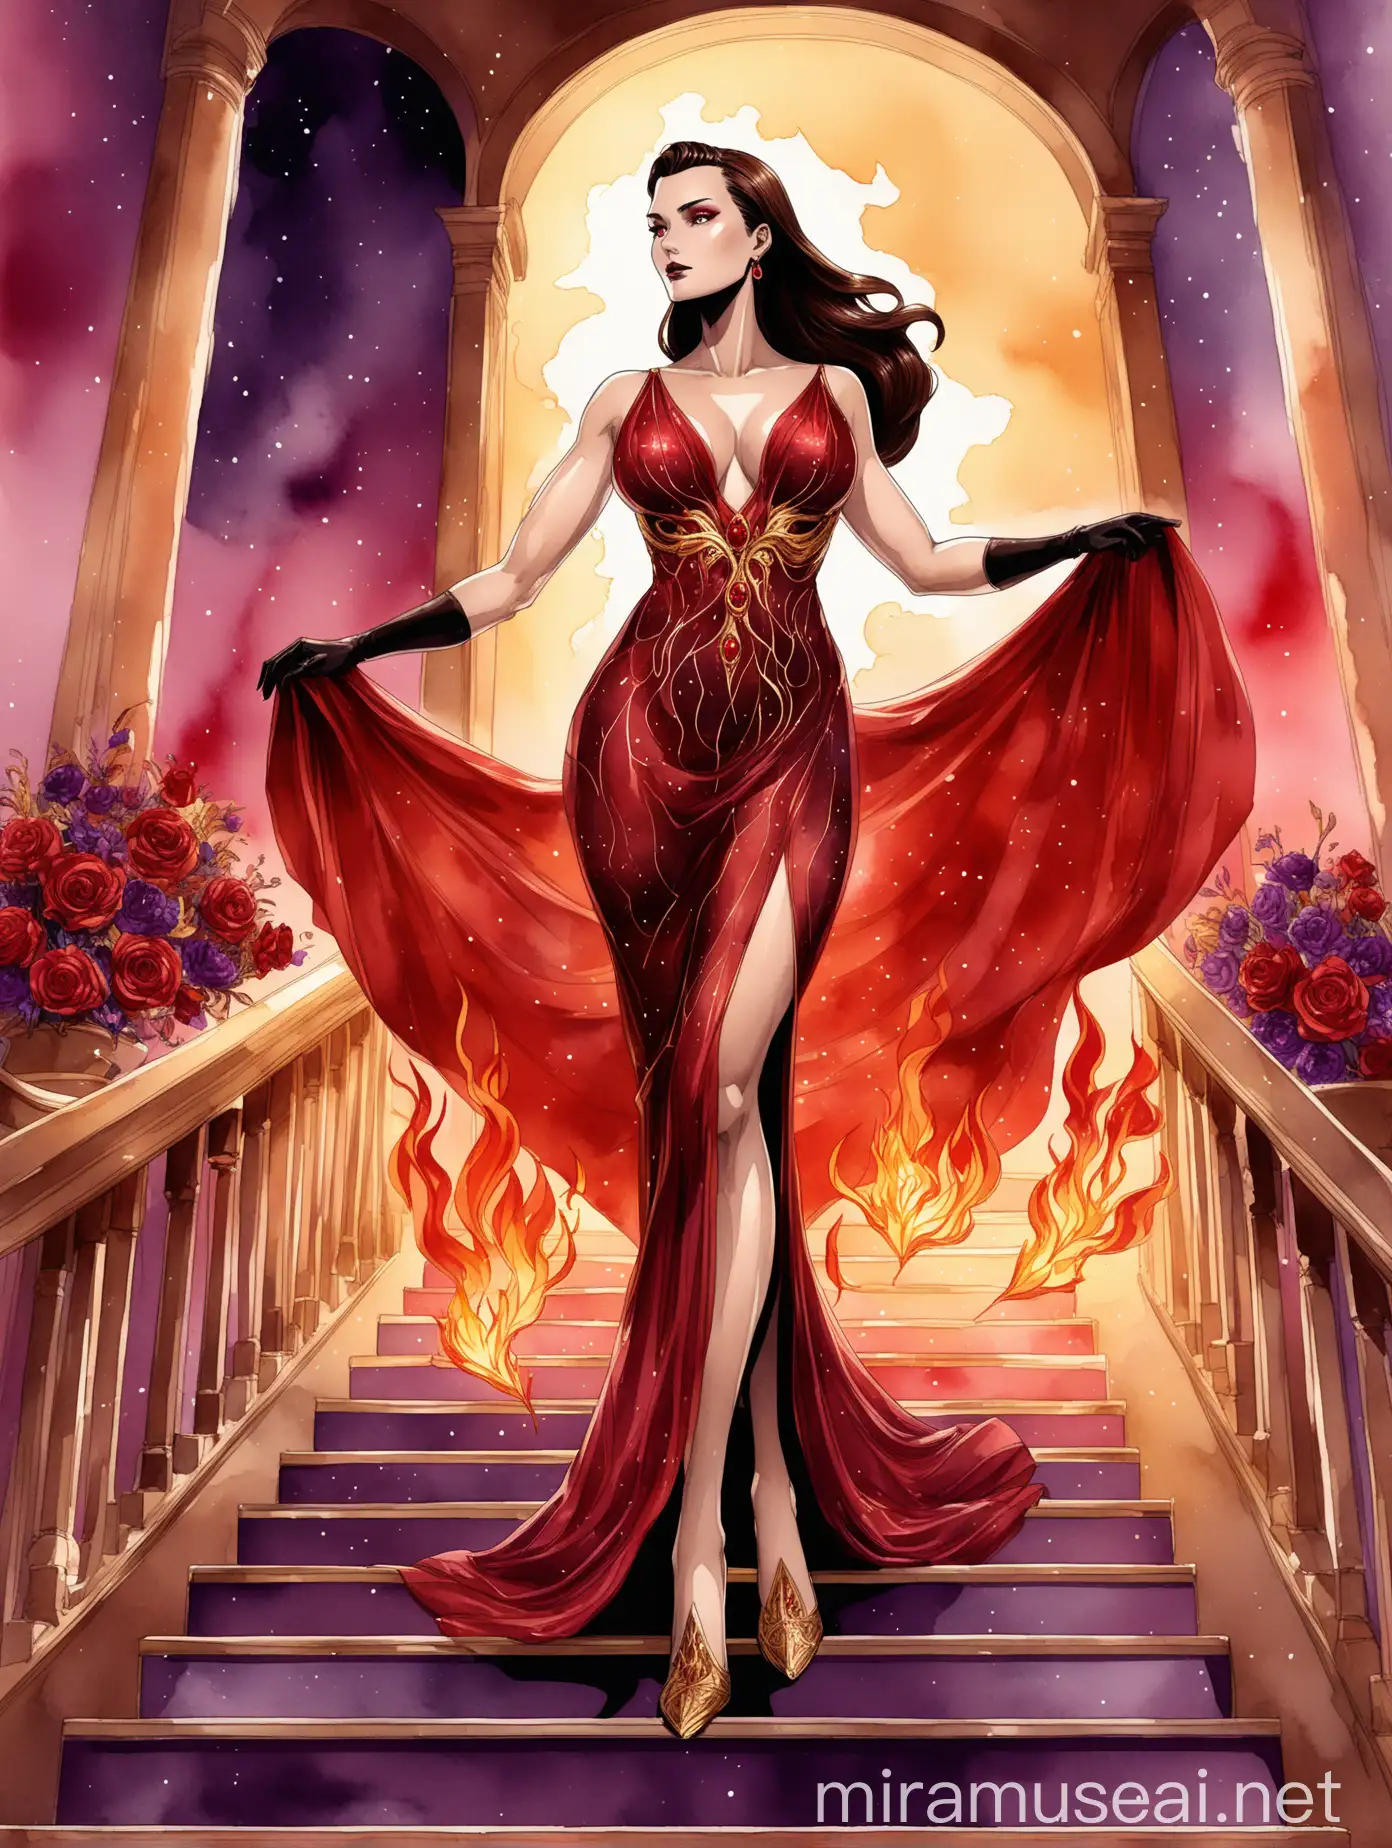 Elegant Woman in Greek Inspired Flame Gown Descending Sparkling Staircase at Sunset